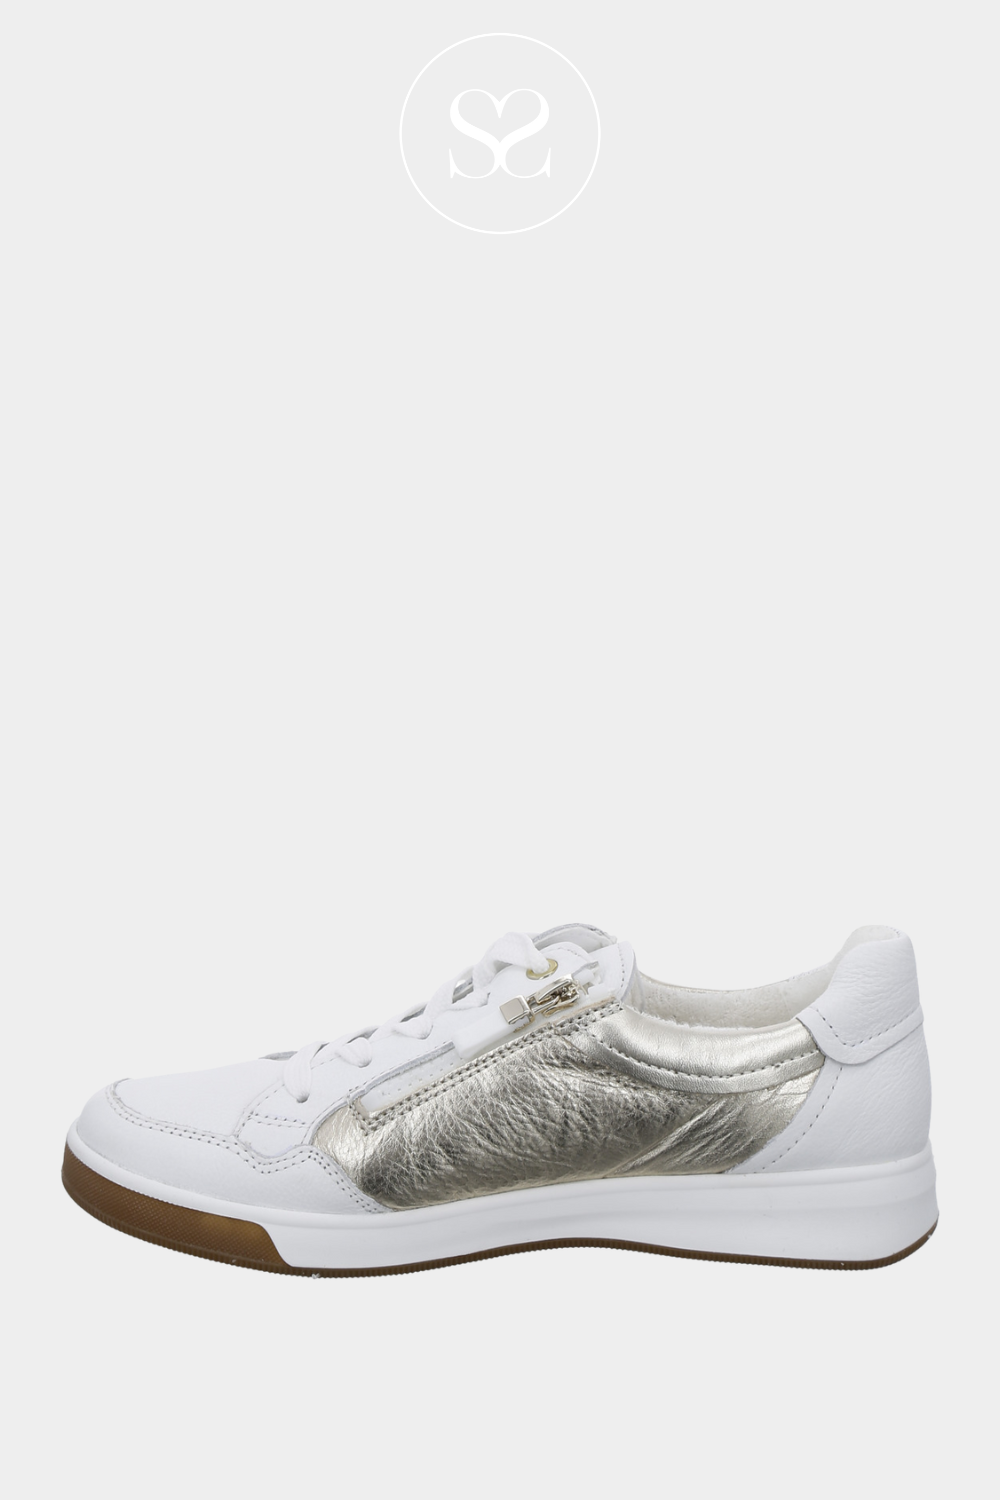 ARA 12-34423-04 WHITE FLAT SOFT LEATHER TRAINERS WITH GOLD PANEL AND SIDE ZIP